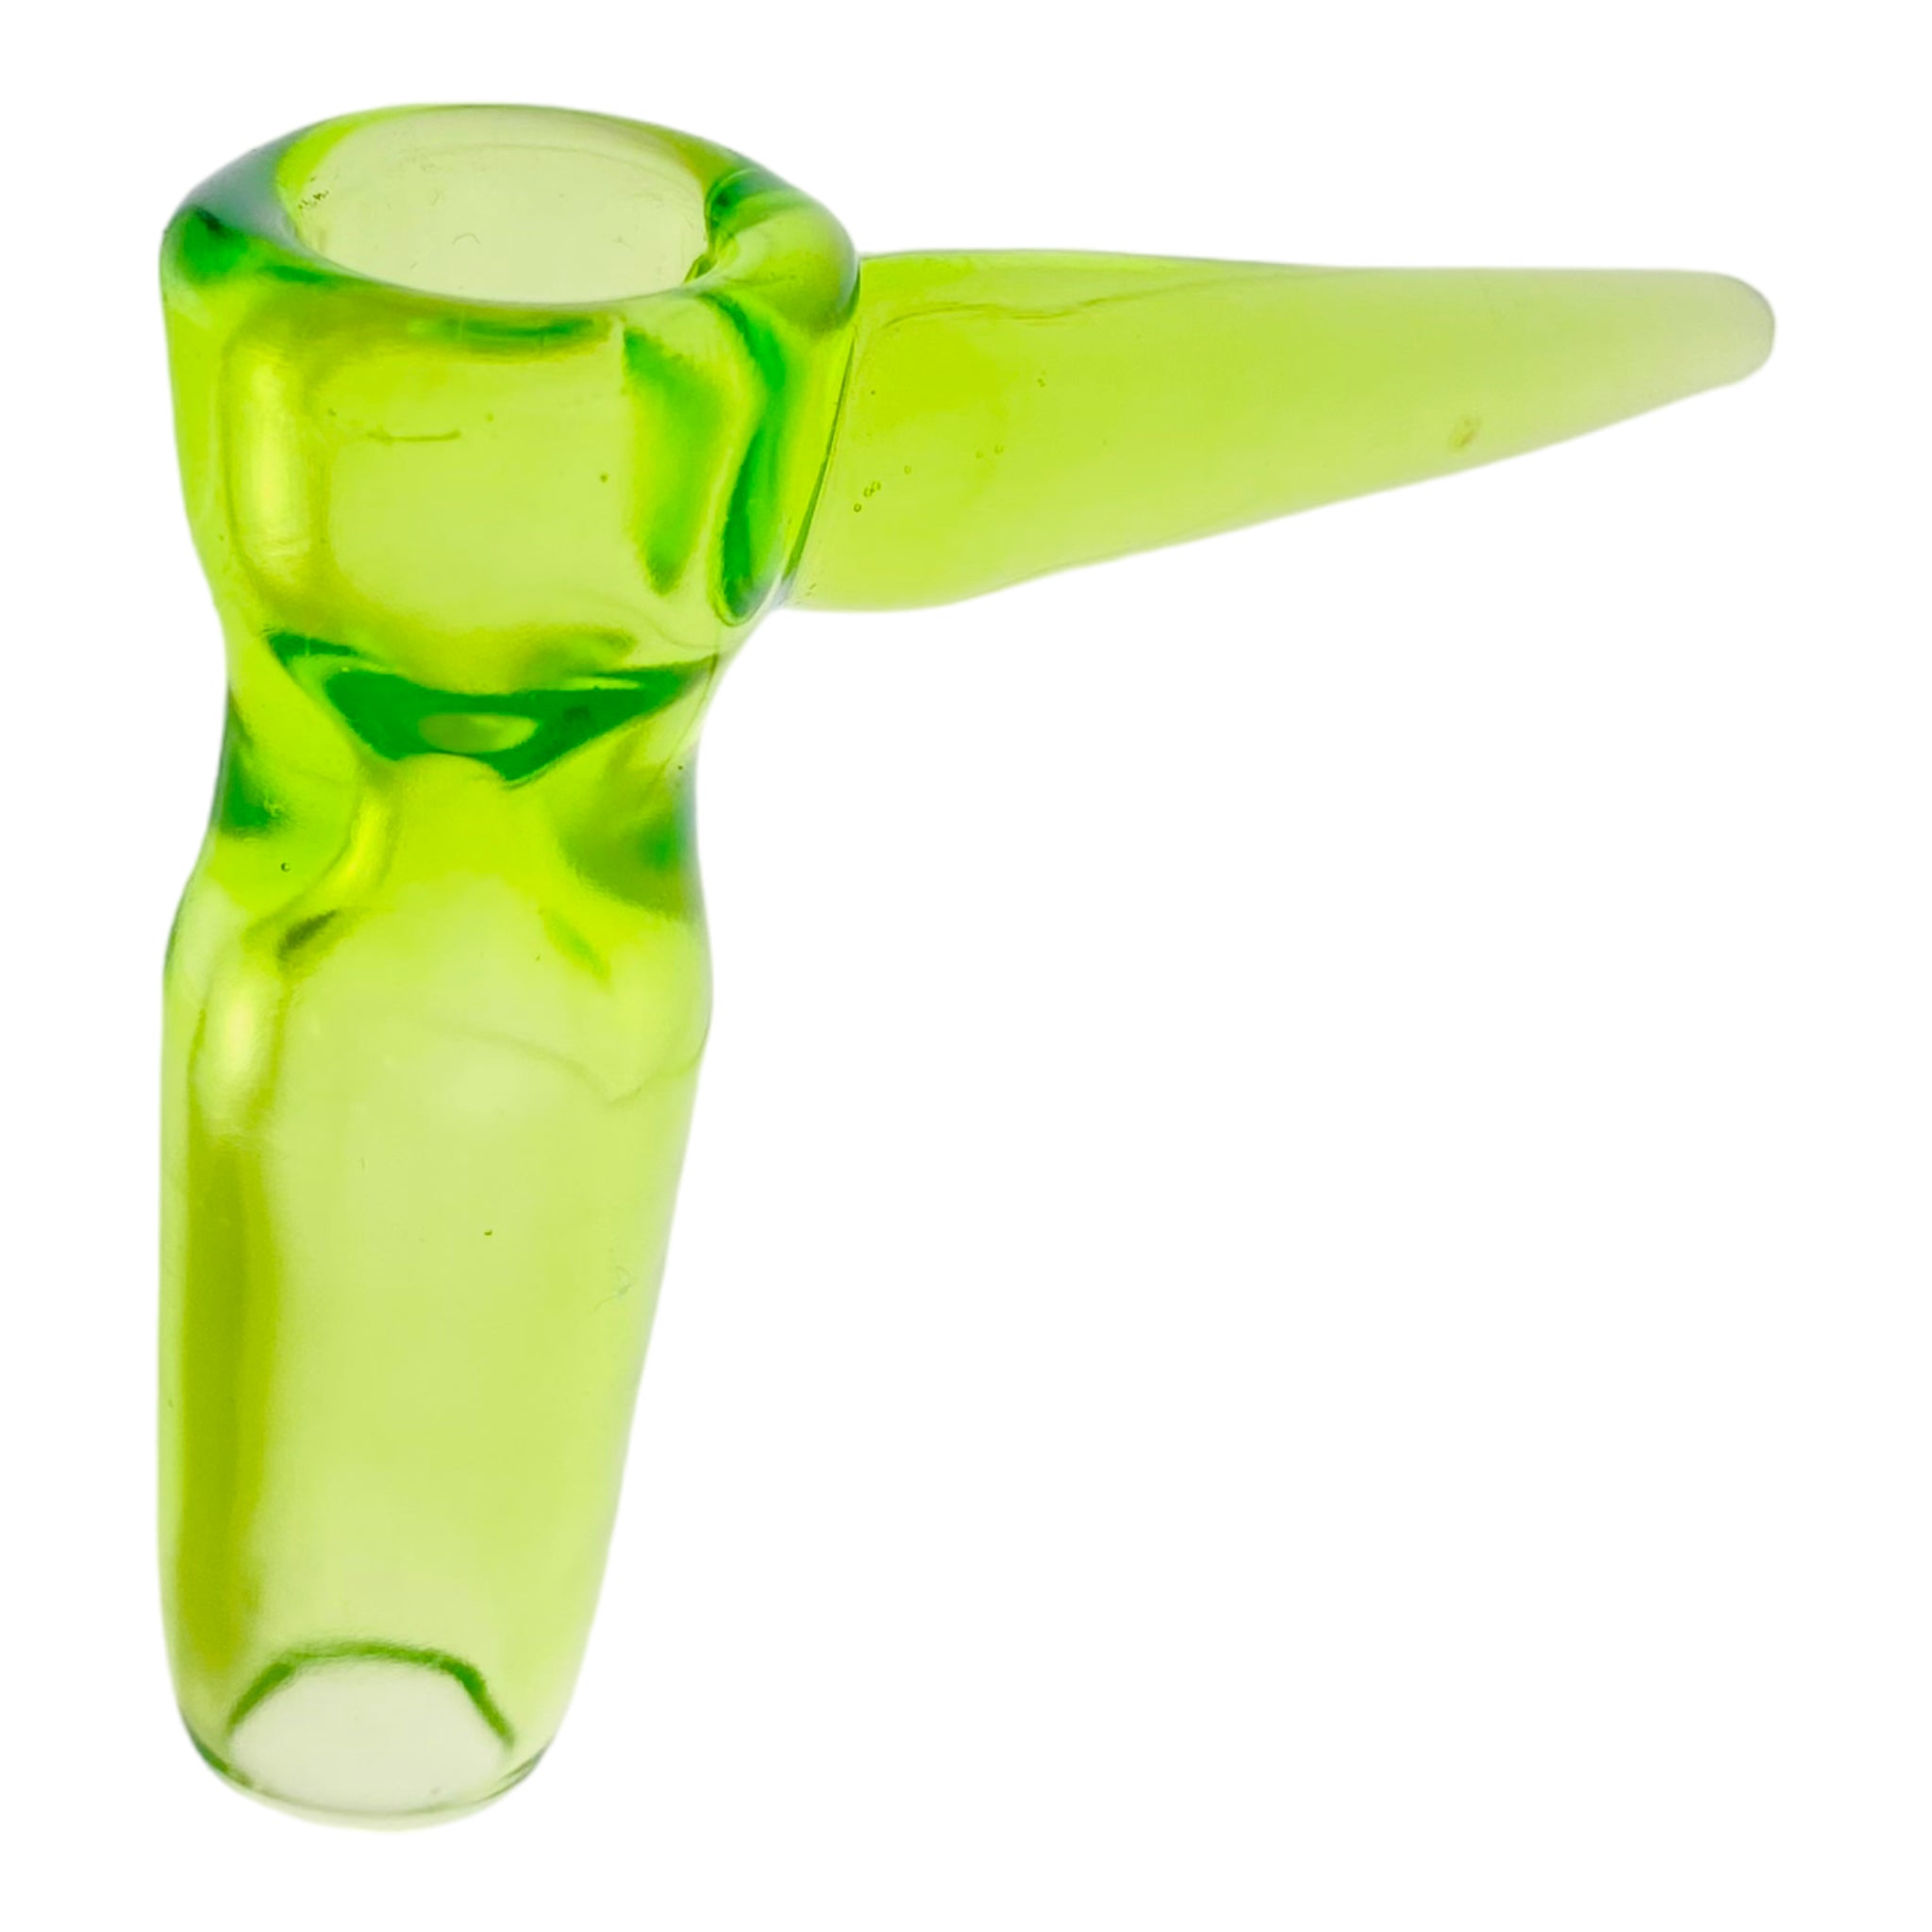 Optera Glass - Green With Green Handle Full Color - 14mm Bowl Piece